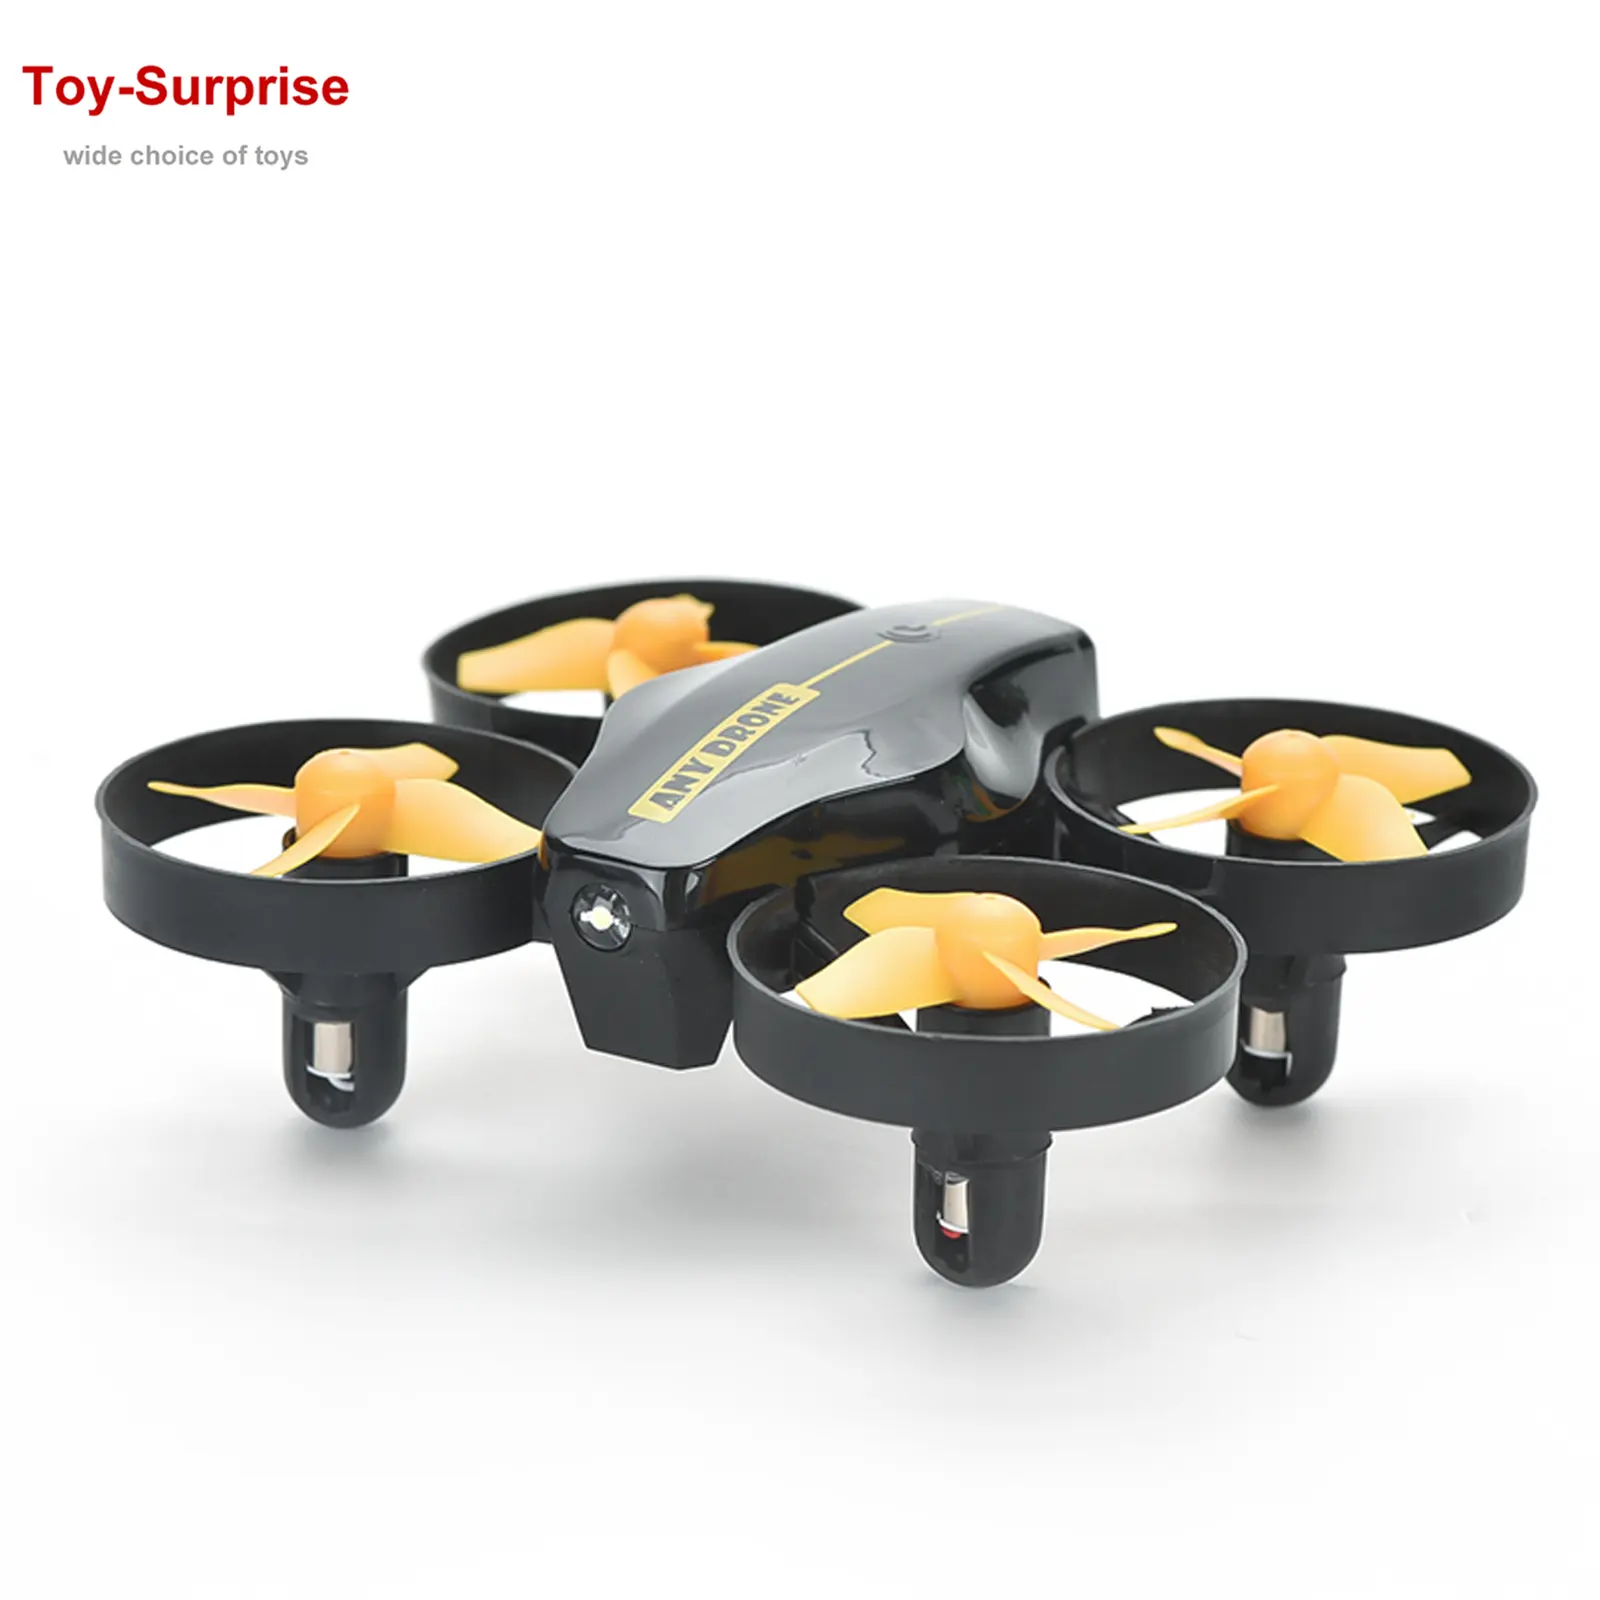 Mini Drone 2.4G 4CH 6-Axis Gyro RC Quadcopter for kids gift